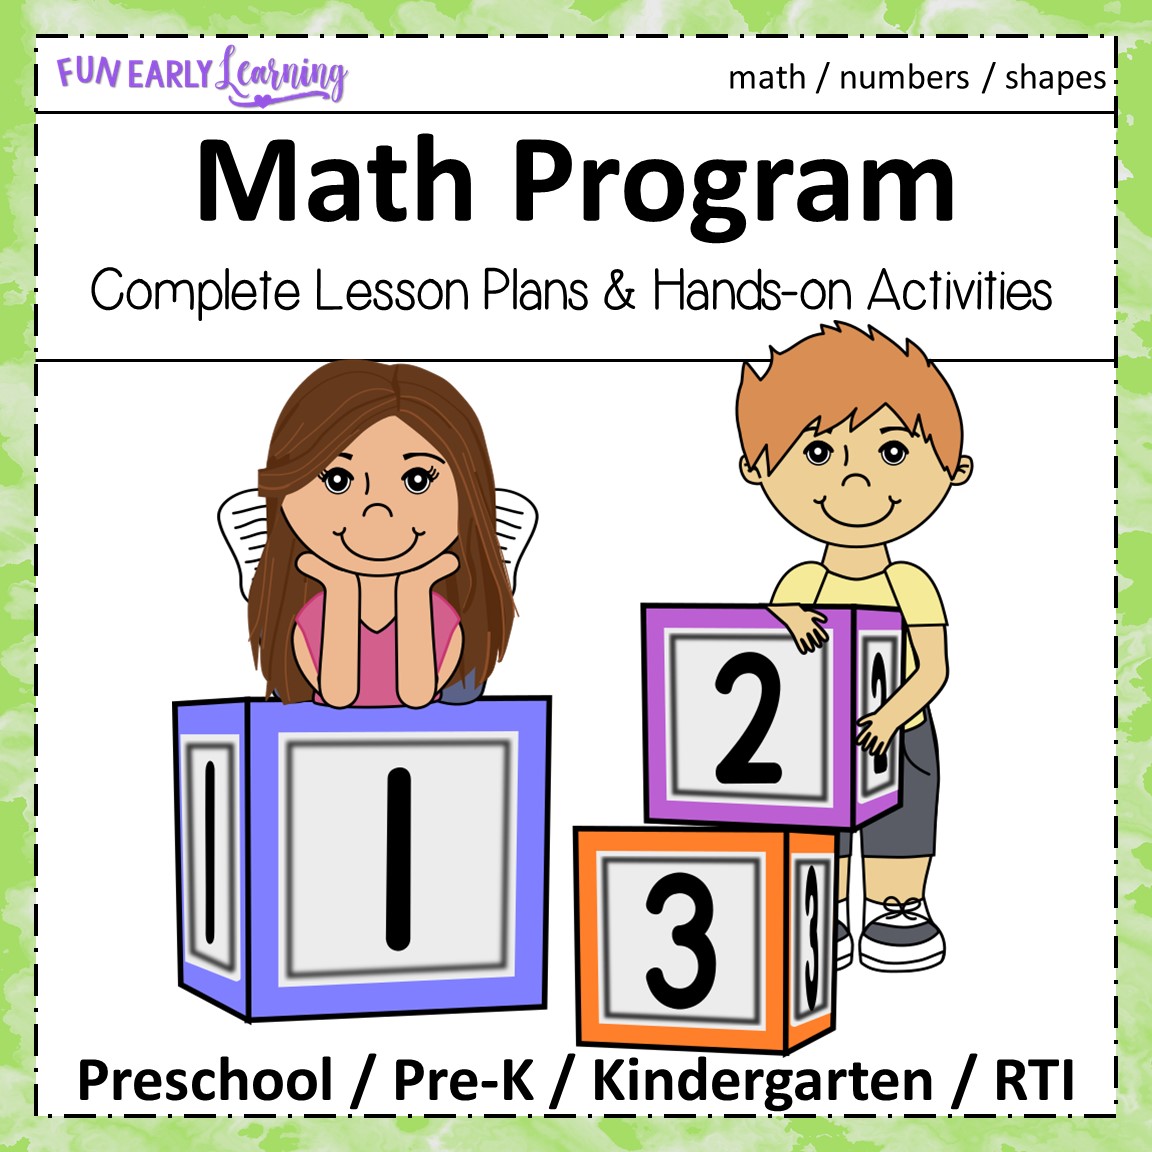 Number plans. Lesson Plan numbers. Math Programming. How to teach Math for preschoolers. Hands on activity.